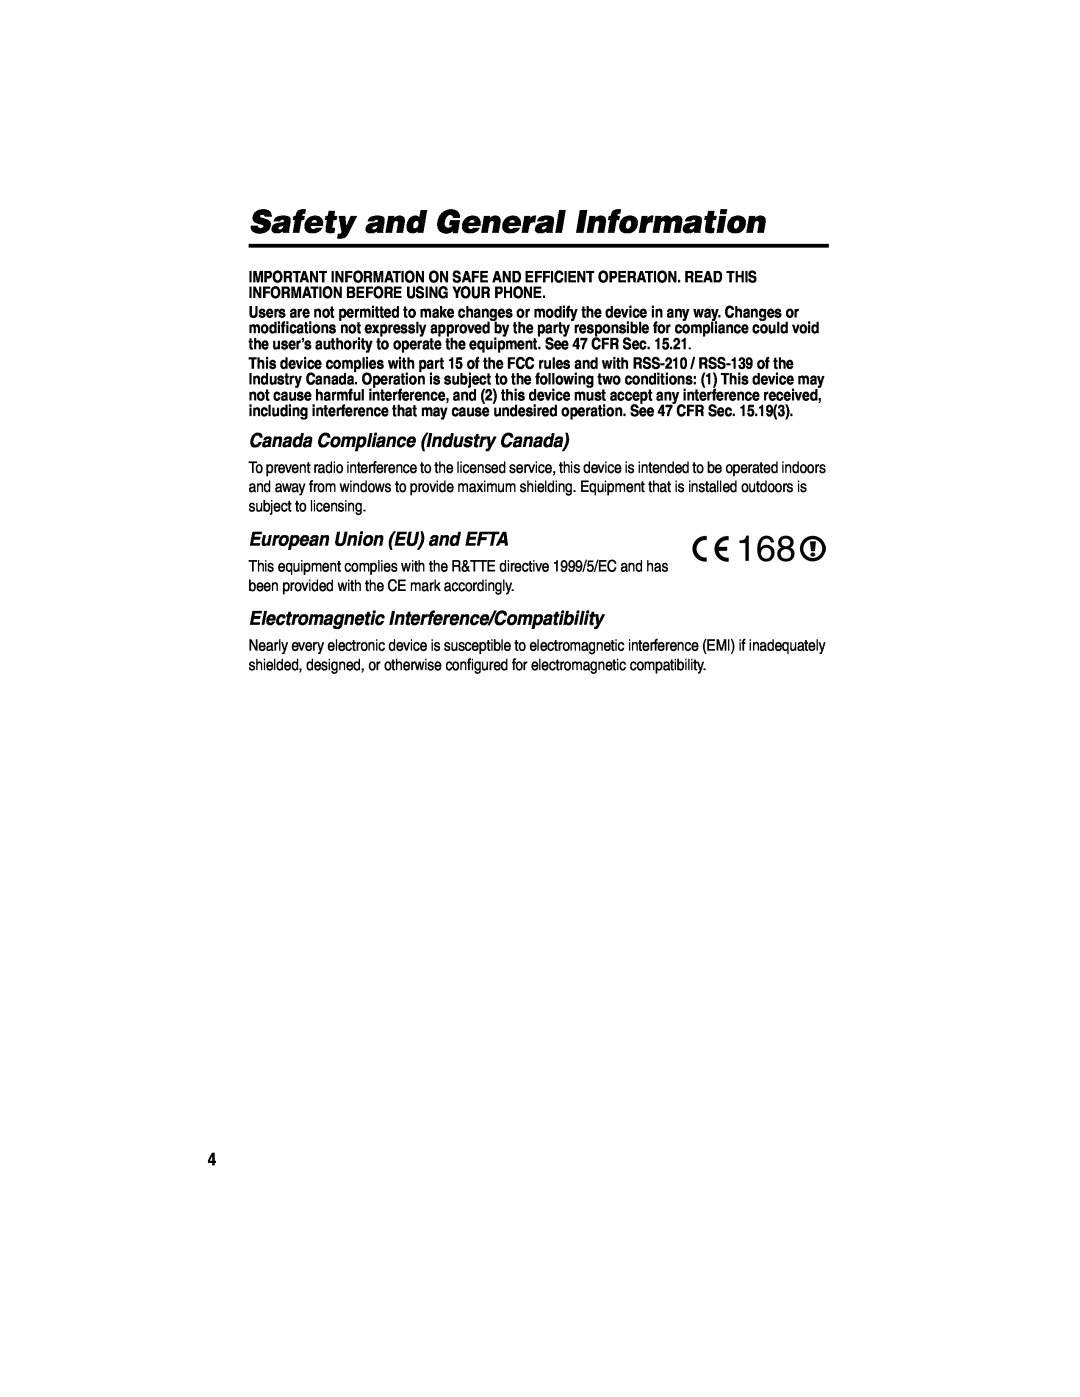 Motorola 89589N manual Safety and General Information, Canada Compliance Industry Canada, European Union EU and EFTA 